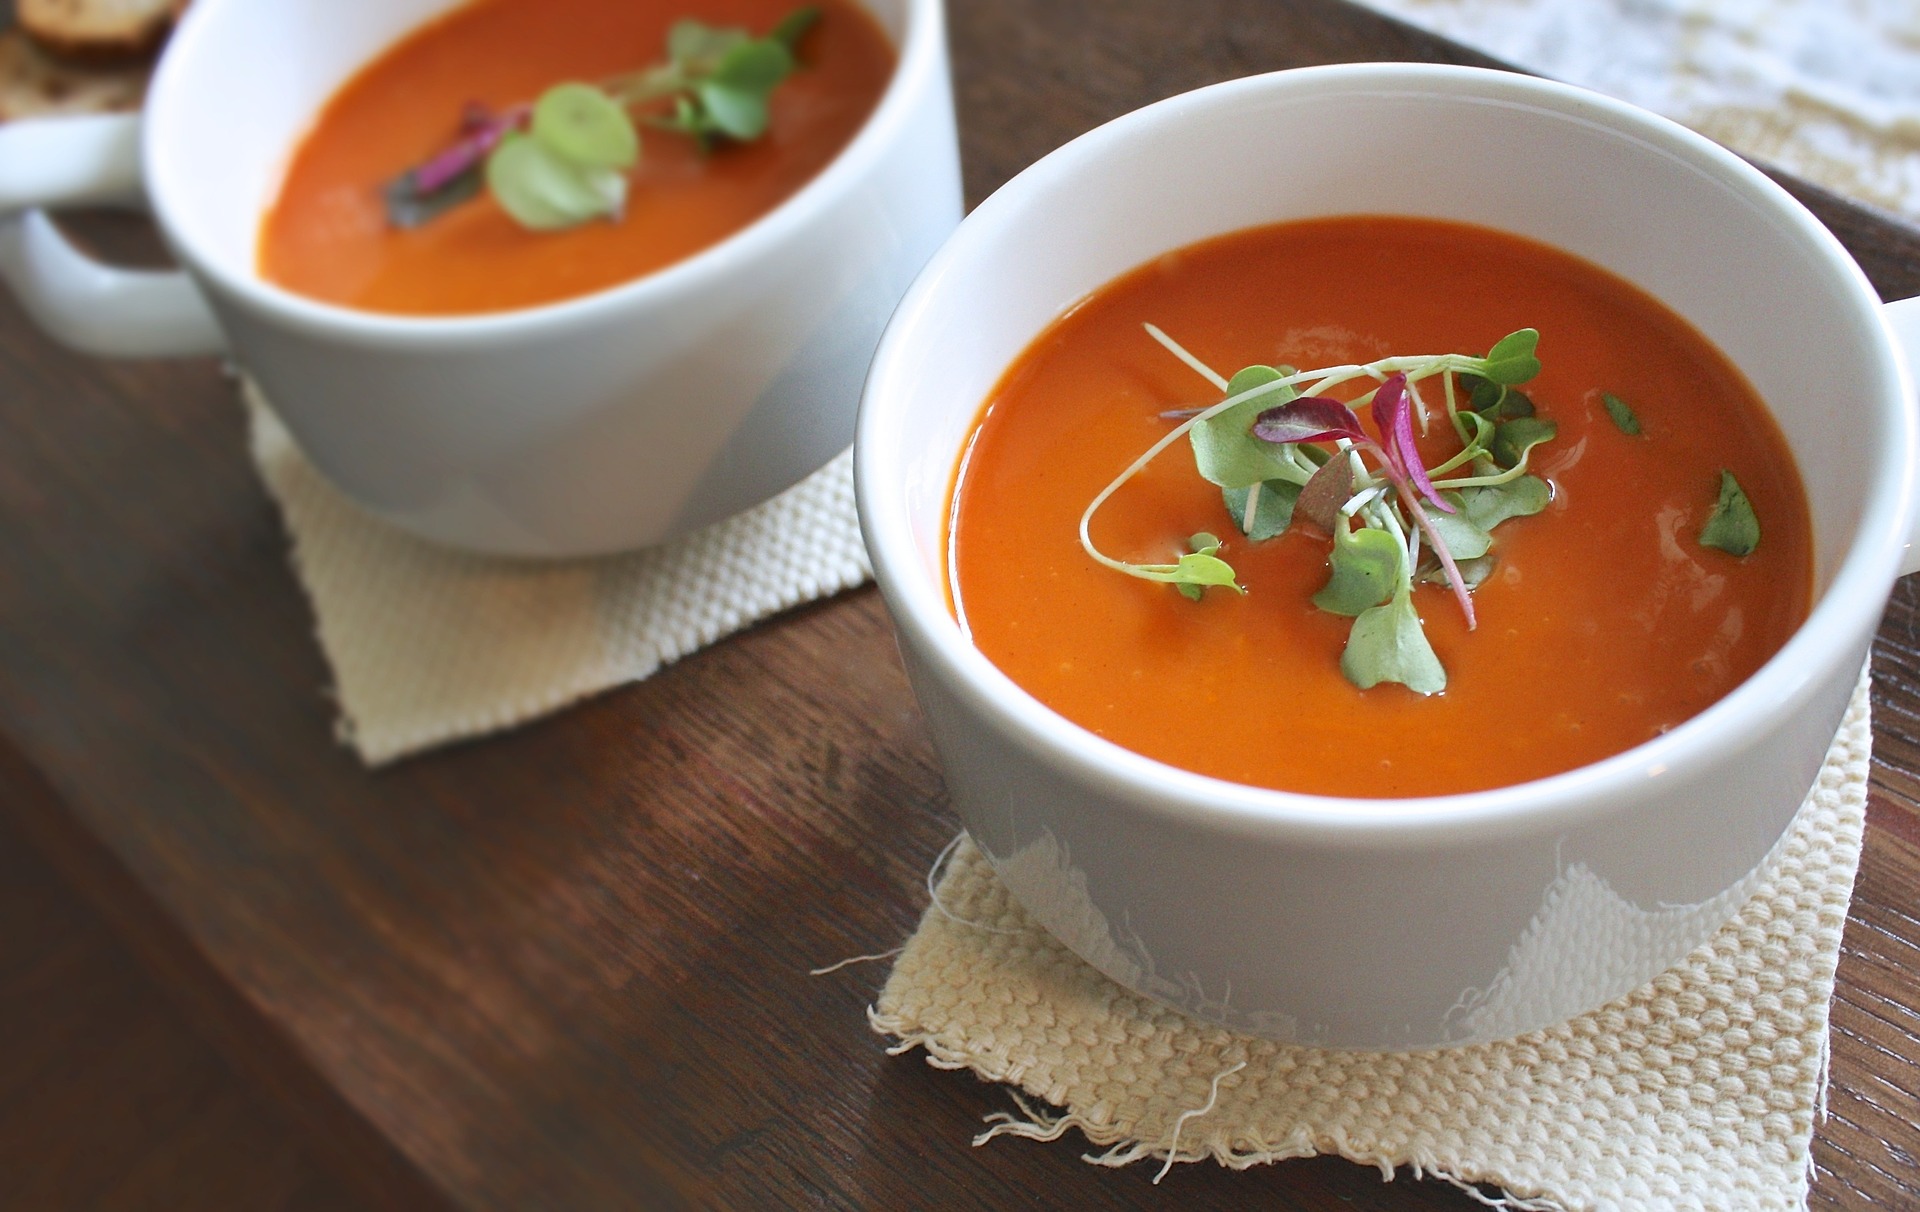 Chef's Choice: Roasted Tomato Soup